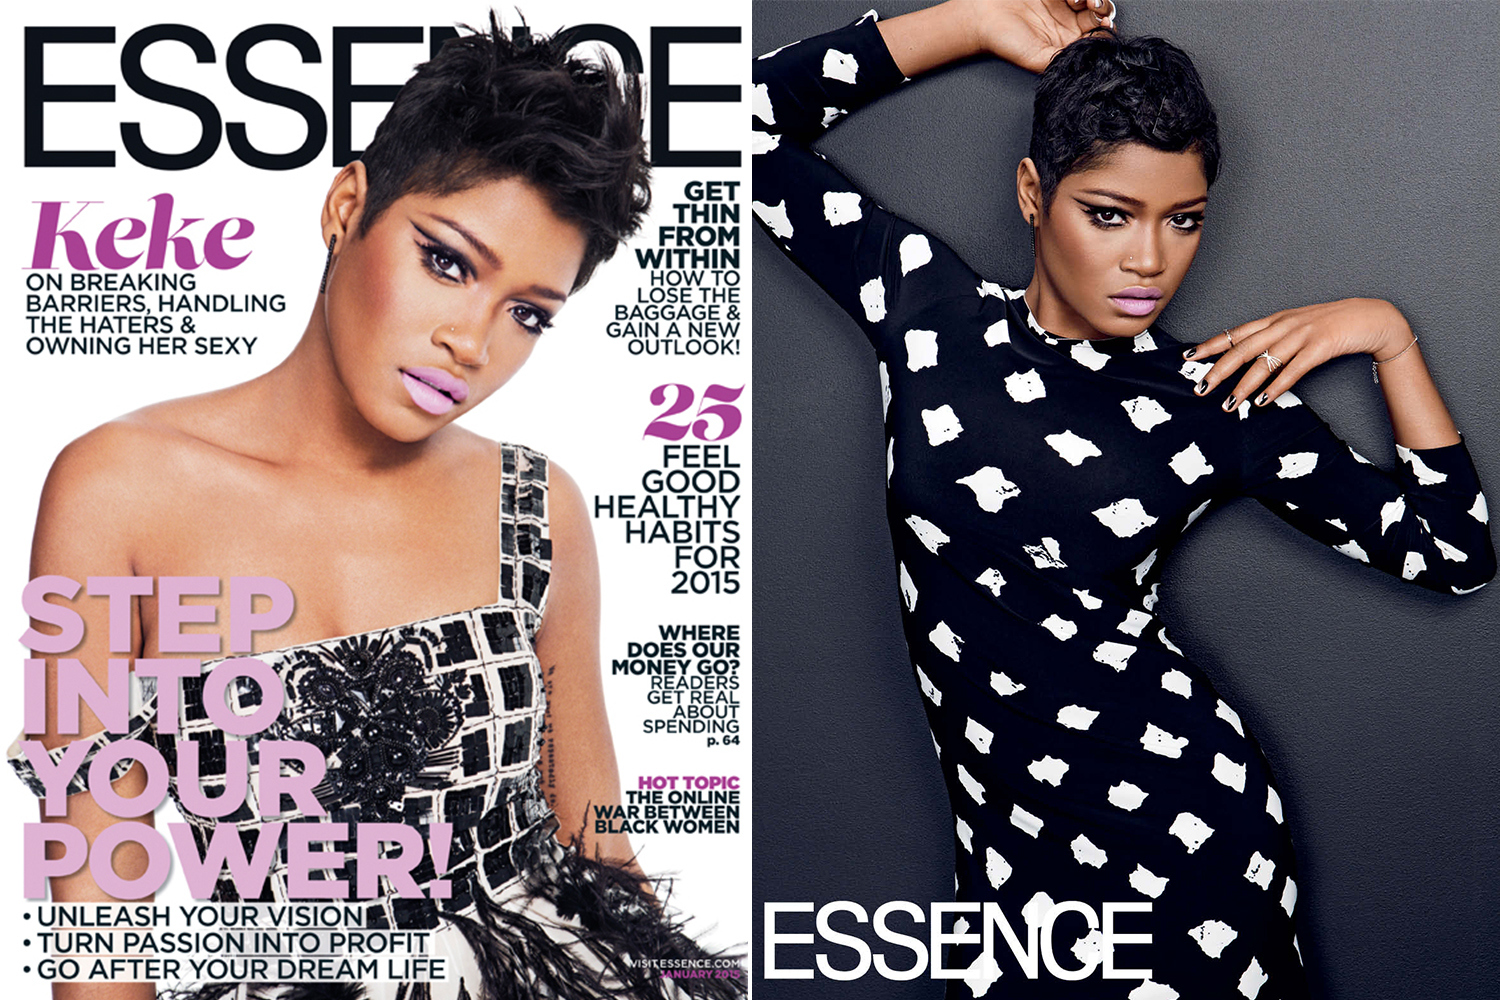 Keke Palmer Is Owning Her Sexy Arta Chic